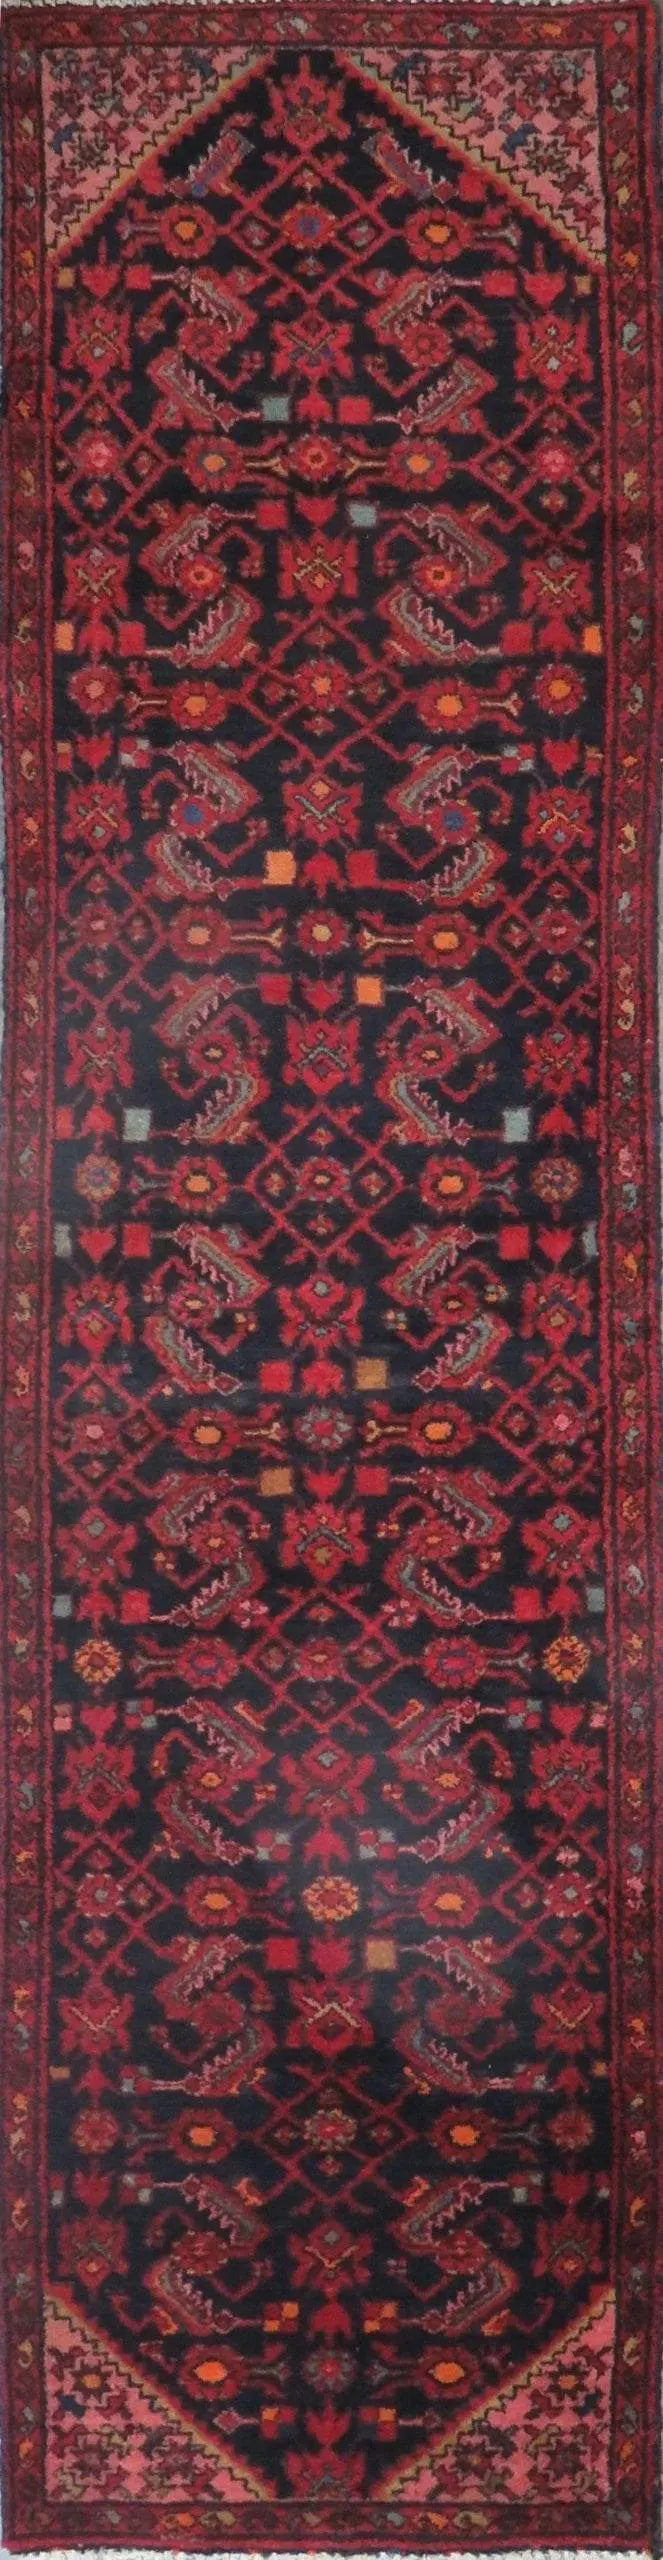 Hand-Knotted Persian Wool Rug _ Luxurious Vintage Design, 10'8" x 2'6", Artisan Crafted